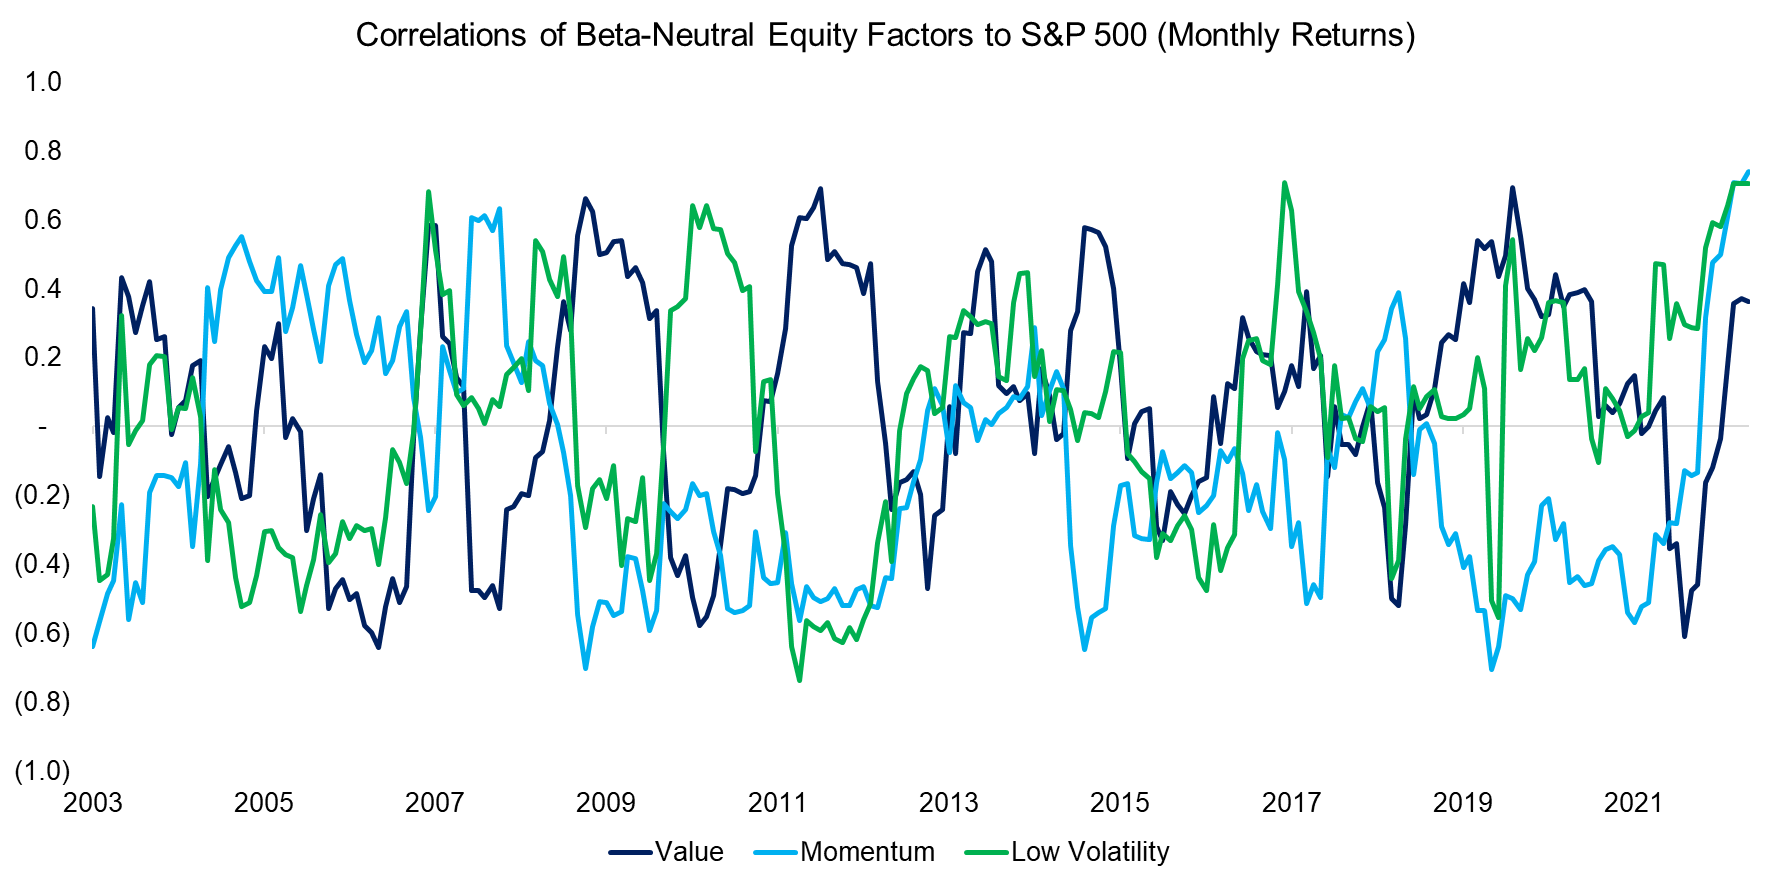 Correlations of Beta-Neutral Equity Factors to S&P 500 (Monthly Returns)